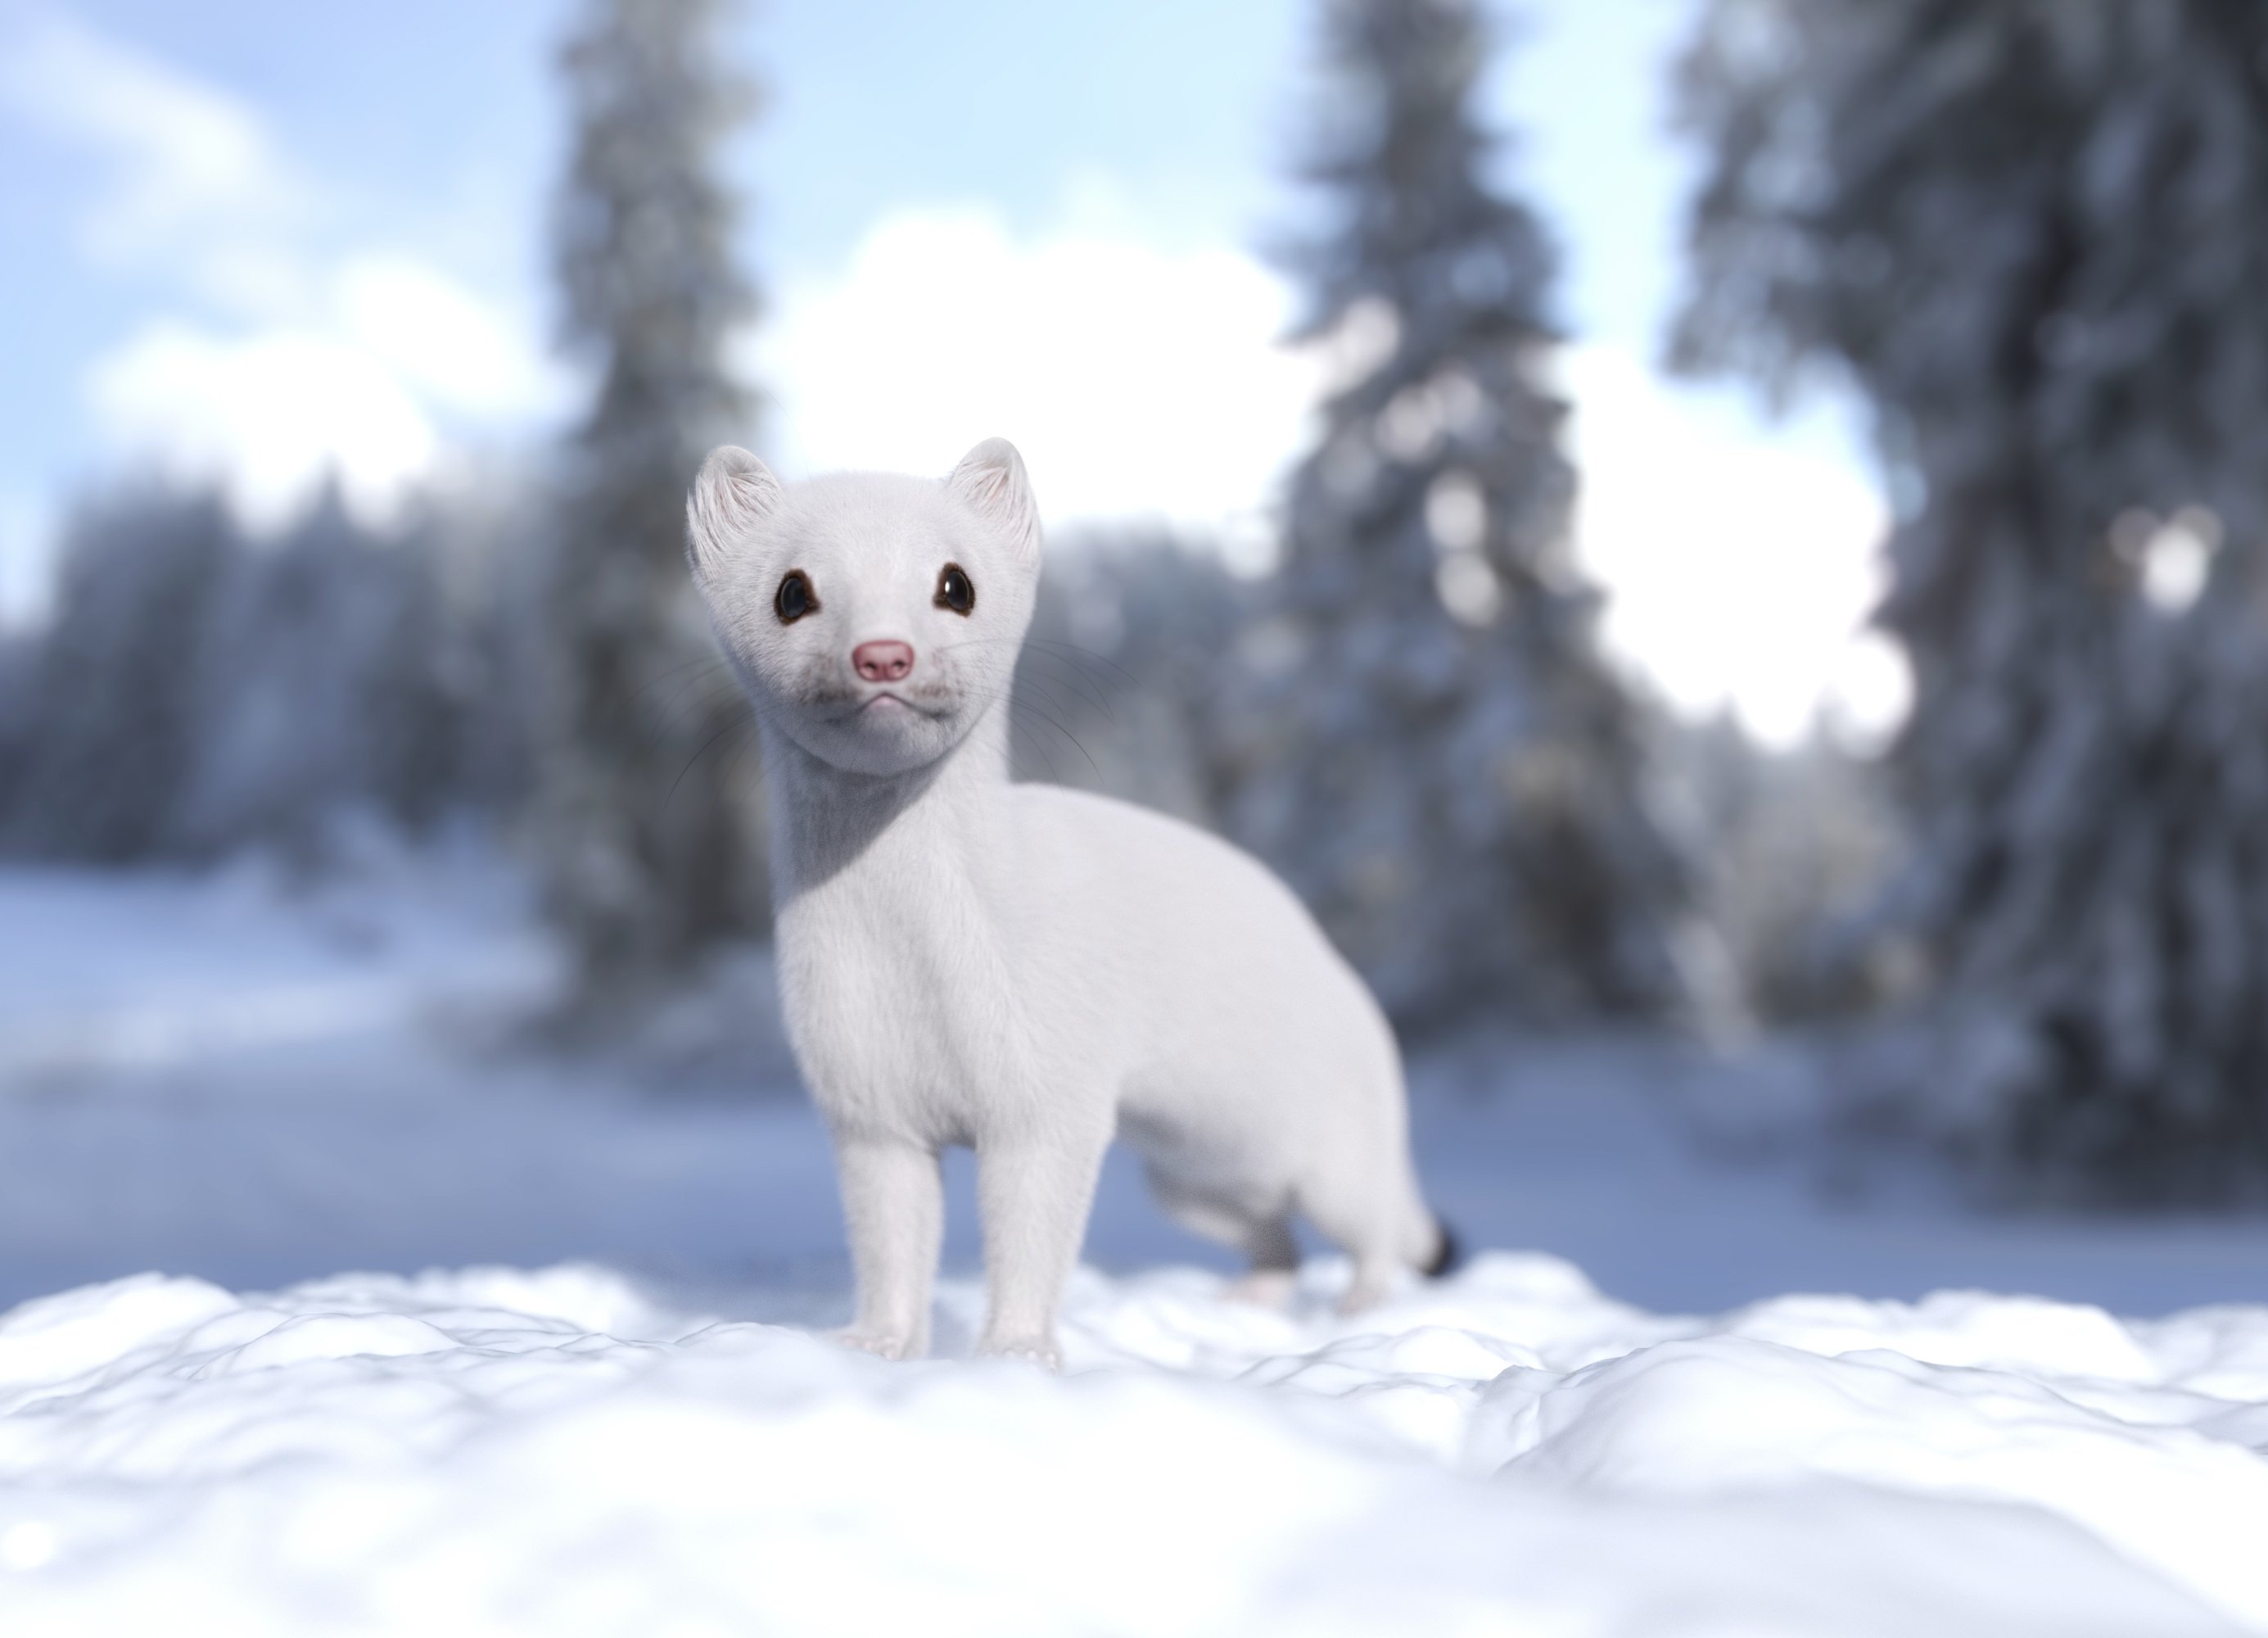 Weasel by AM by: Alessandro_AM, 3D Models by Daz 3D